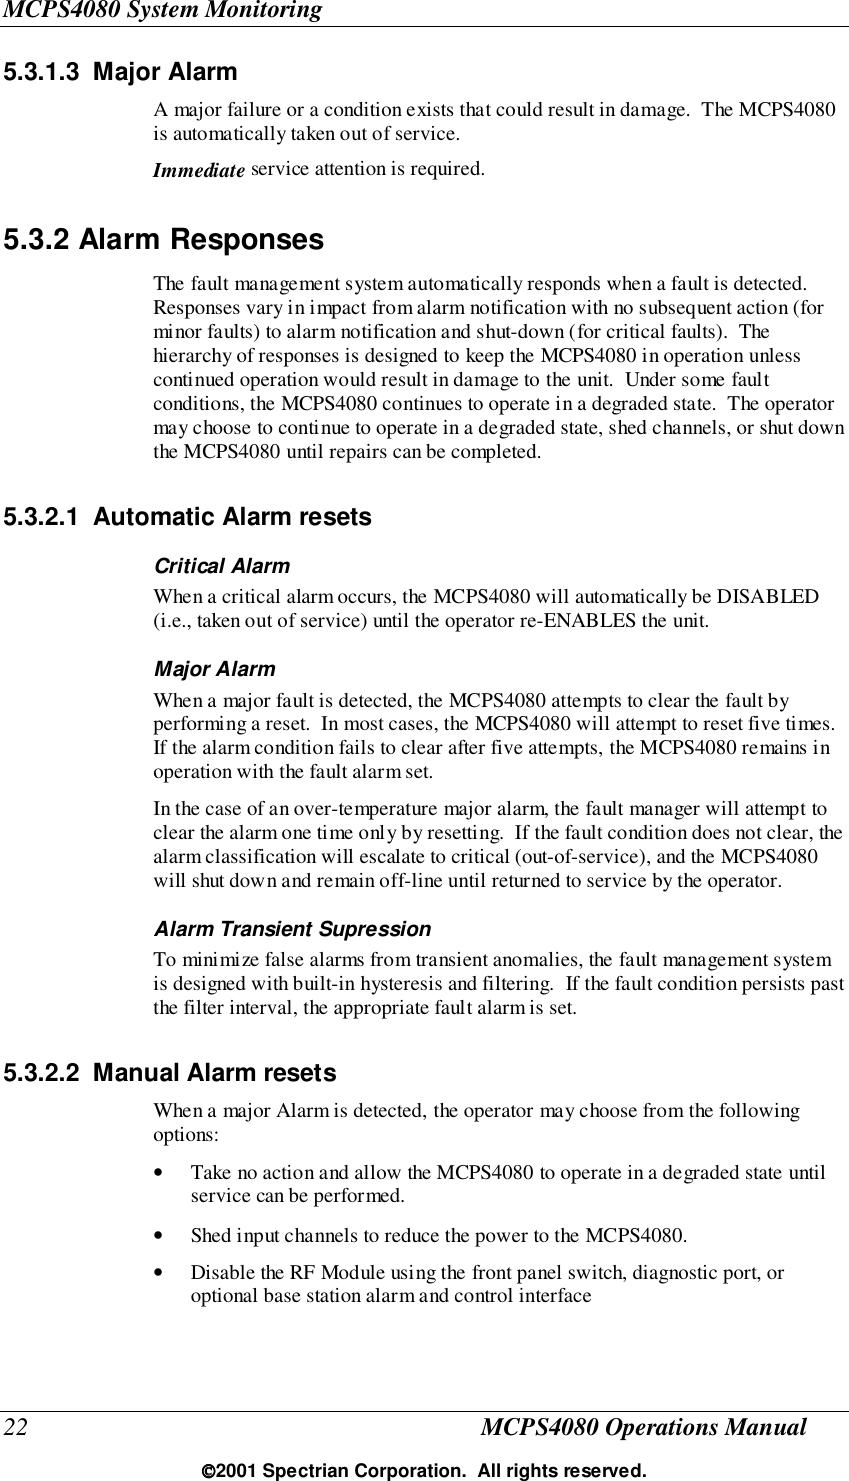 MCPS4080 System Monitoring22 MCPS4080 Operations Manual2001 Spectrian Corporation.  All rights reserved.5.3.1.3 Major AlarmA major failure or a condition exists that could result in damage.  The MCPS4080is automatically taken out of service.Immediate service attention is required.5.3.2 Alarm ResponsesThe fault management system automatically responds when a fault is detected.Responses vary in impact from alarm notification with no subsequent action (forminor faults) to alarm notification and shut-down (for critical faults).  Thehierarchy of responses is designed to keep the MCPS4080 in operation unlesscontinued operation would result in damage to the unit.  Under some faultconditions, the MCPS4080 continues to operate in a degraded state.  The operatormay choose to continue to operate in a degraded state, shed channels, or shut downthe MCPS4080 until repairs can be completed.5.3.2.1  Automatic Alarm resetsCritical AlarmWhen a critical alarm occurs, the MCPS4080 will automatically be DISABLED(i.e., taken out of service) until the operator re-ENABLES the unit.Major AlarmWhen a major fault is detected, the MCPS4080 attempts to clear the fault byperforming a reset.  In most cases, the MCPS4080 will attempt to reset five times.If the alarm condition fails to clear after five attempts, the MCPS4080 remains inoperation with the fault alarm set.In the case of an over-temperature major alarm, the fault manager will attempt toclear the alarm one time only by resetting.  If the fault condition does not clear, thealarm classification will escalate to critical (out-of-service), and the MCPS4080will shut down and remain off-line until returned to service by the operator.Alarm Transient SupressionTo minimize false alarms from transient anomalies, the fault management systemis designed with built-in hysteresis and filtering.  If the fault condition persists pastthe filter interval, the appropriate fault alarm is set.5.3.2.2  Manual Alarm resetsWhen a major Alarm is detected, the operator may choose from the followingoptions:• Take no action and allow the MCPS4080 to operate in a degraded state untilservice can be performed.• Shed input channels to reduce the power to the MCPS4080.• Disable the RF Module using the front panel switch, diagnostic port, oroptional base station alarm and control interface